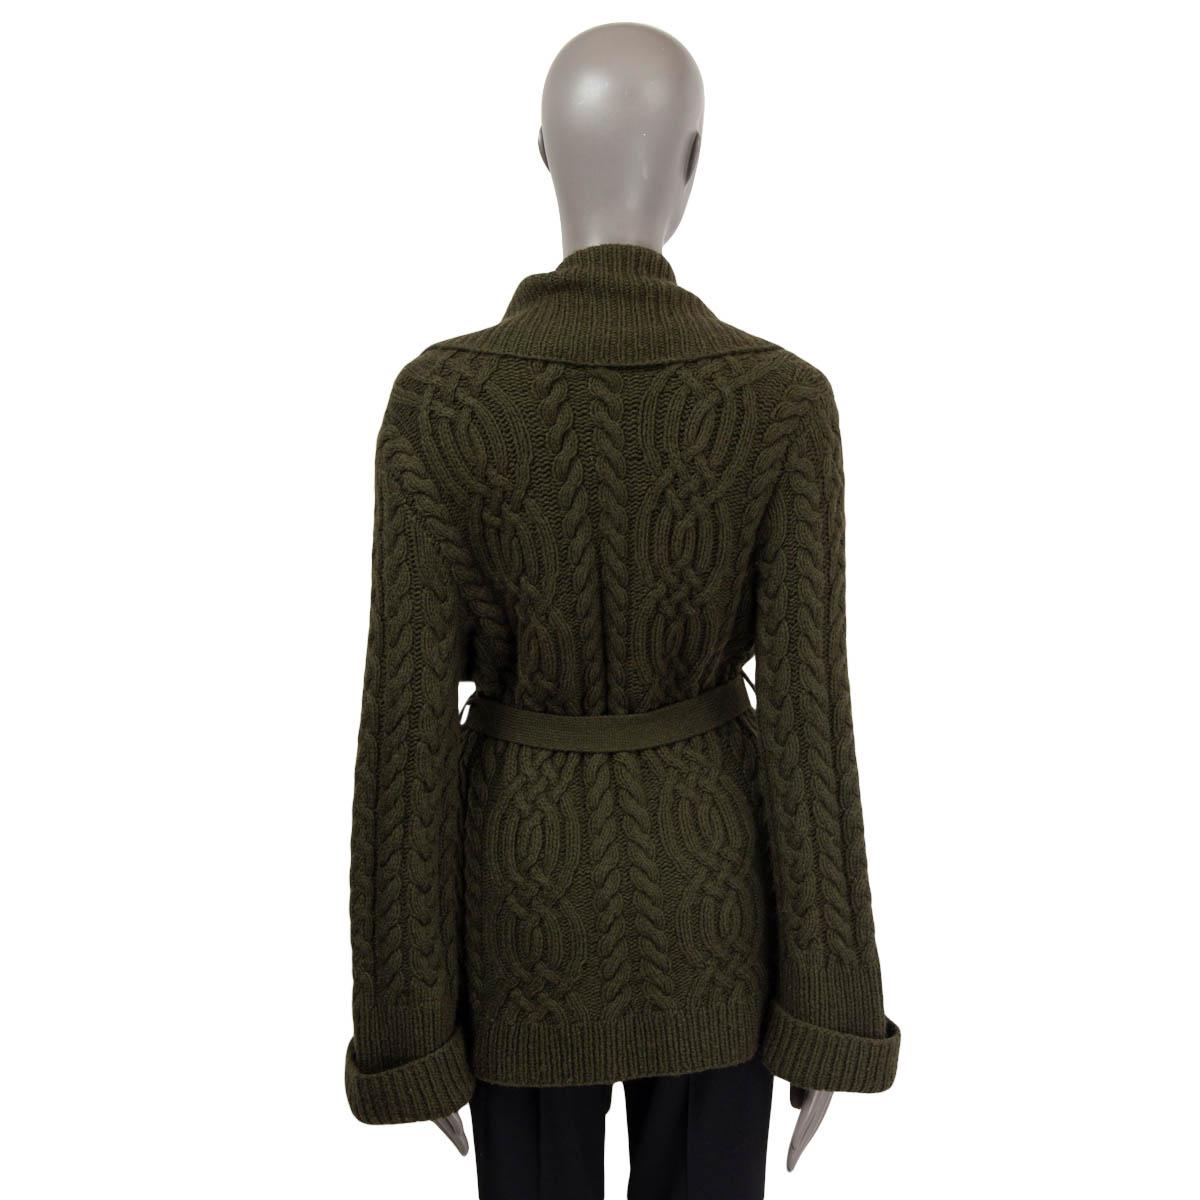 Black RALPH LAUREN olive green cashmere blend CABLE KNIT Cardigan Sweater XL For Sale